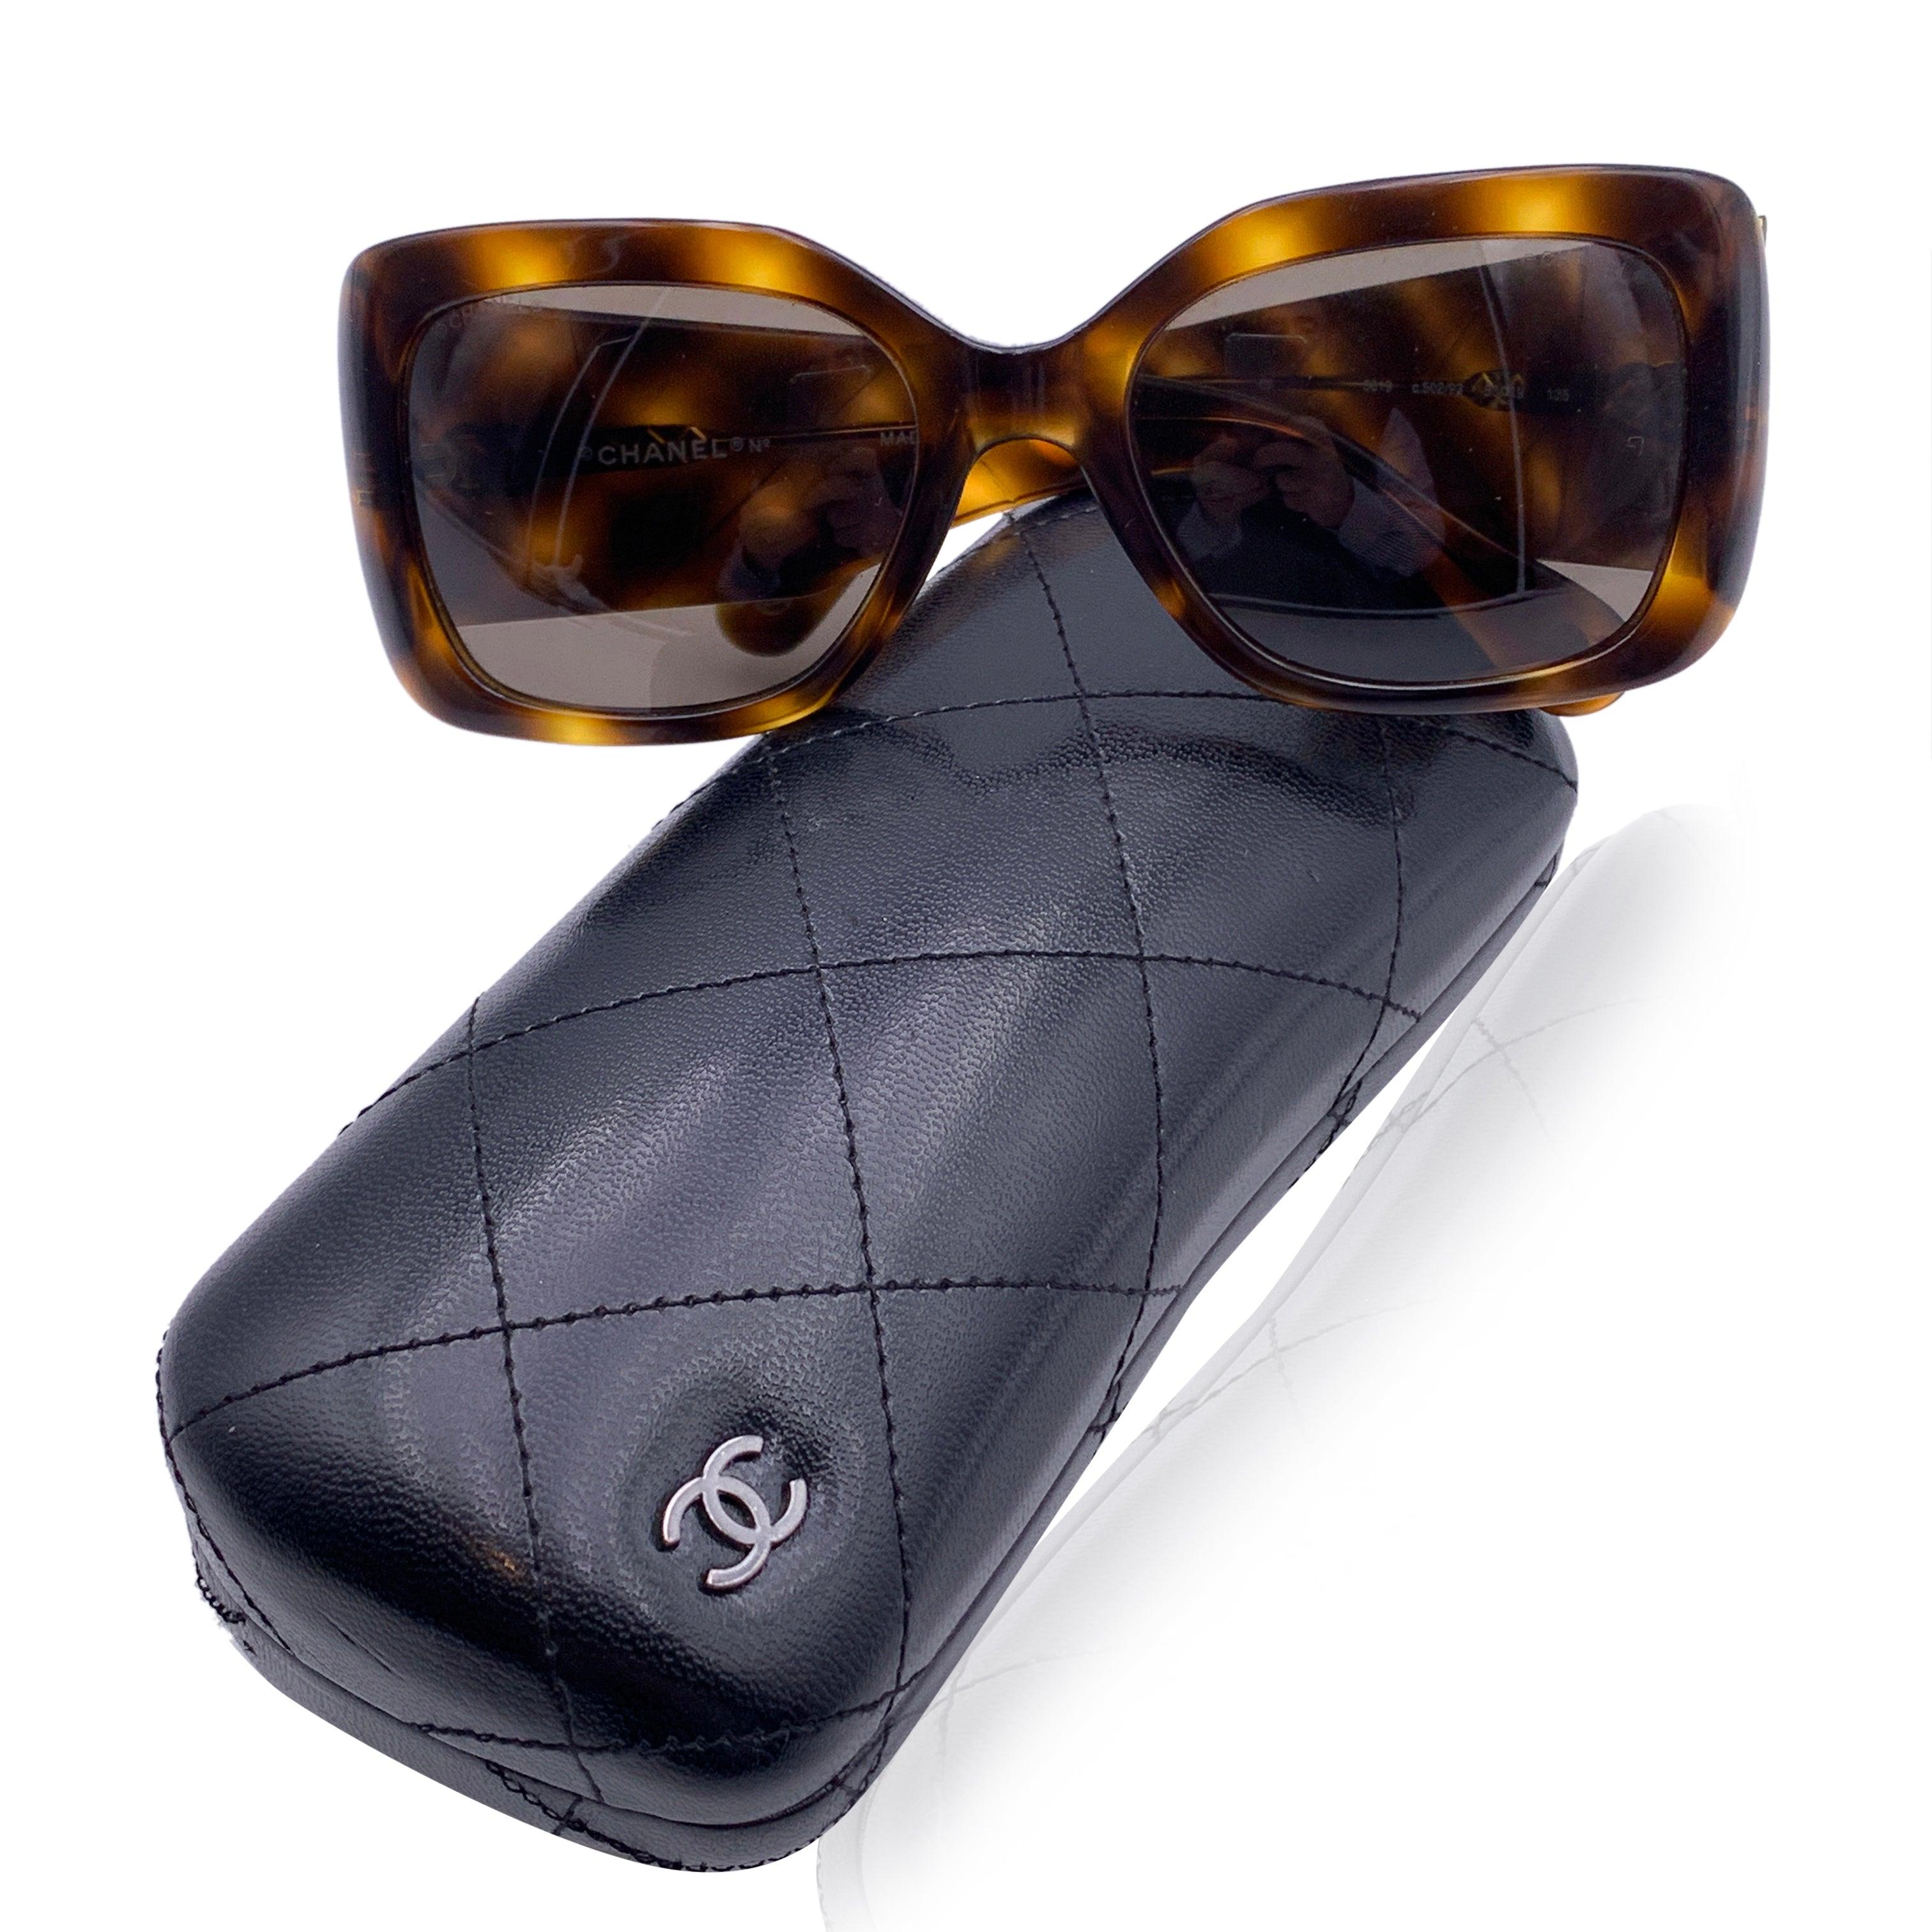 Chanel rectangle sunglasses mod. 5019 - c.502/93. They feature brown tortoise acetate frame. Gold metal CC logo and quilting on the arms. Grey lenses. Mod & refs.: mod. 5019- c.502/93 - 53/19 - 135. Made in Italy Details MATERIAL: Acetate COLOR: